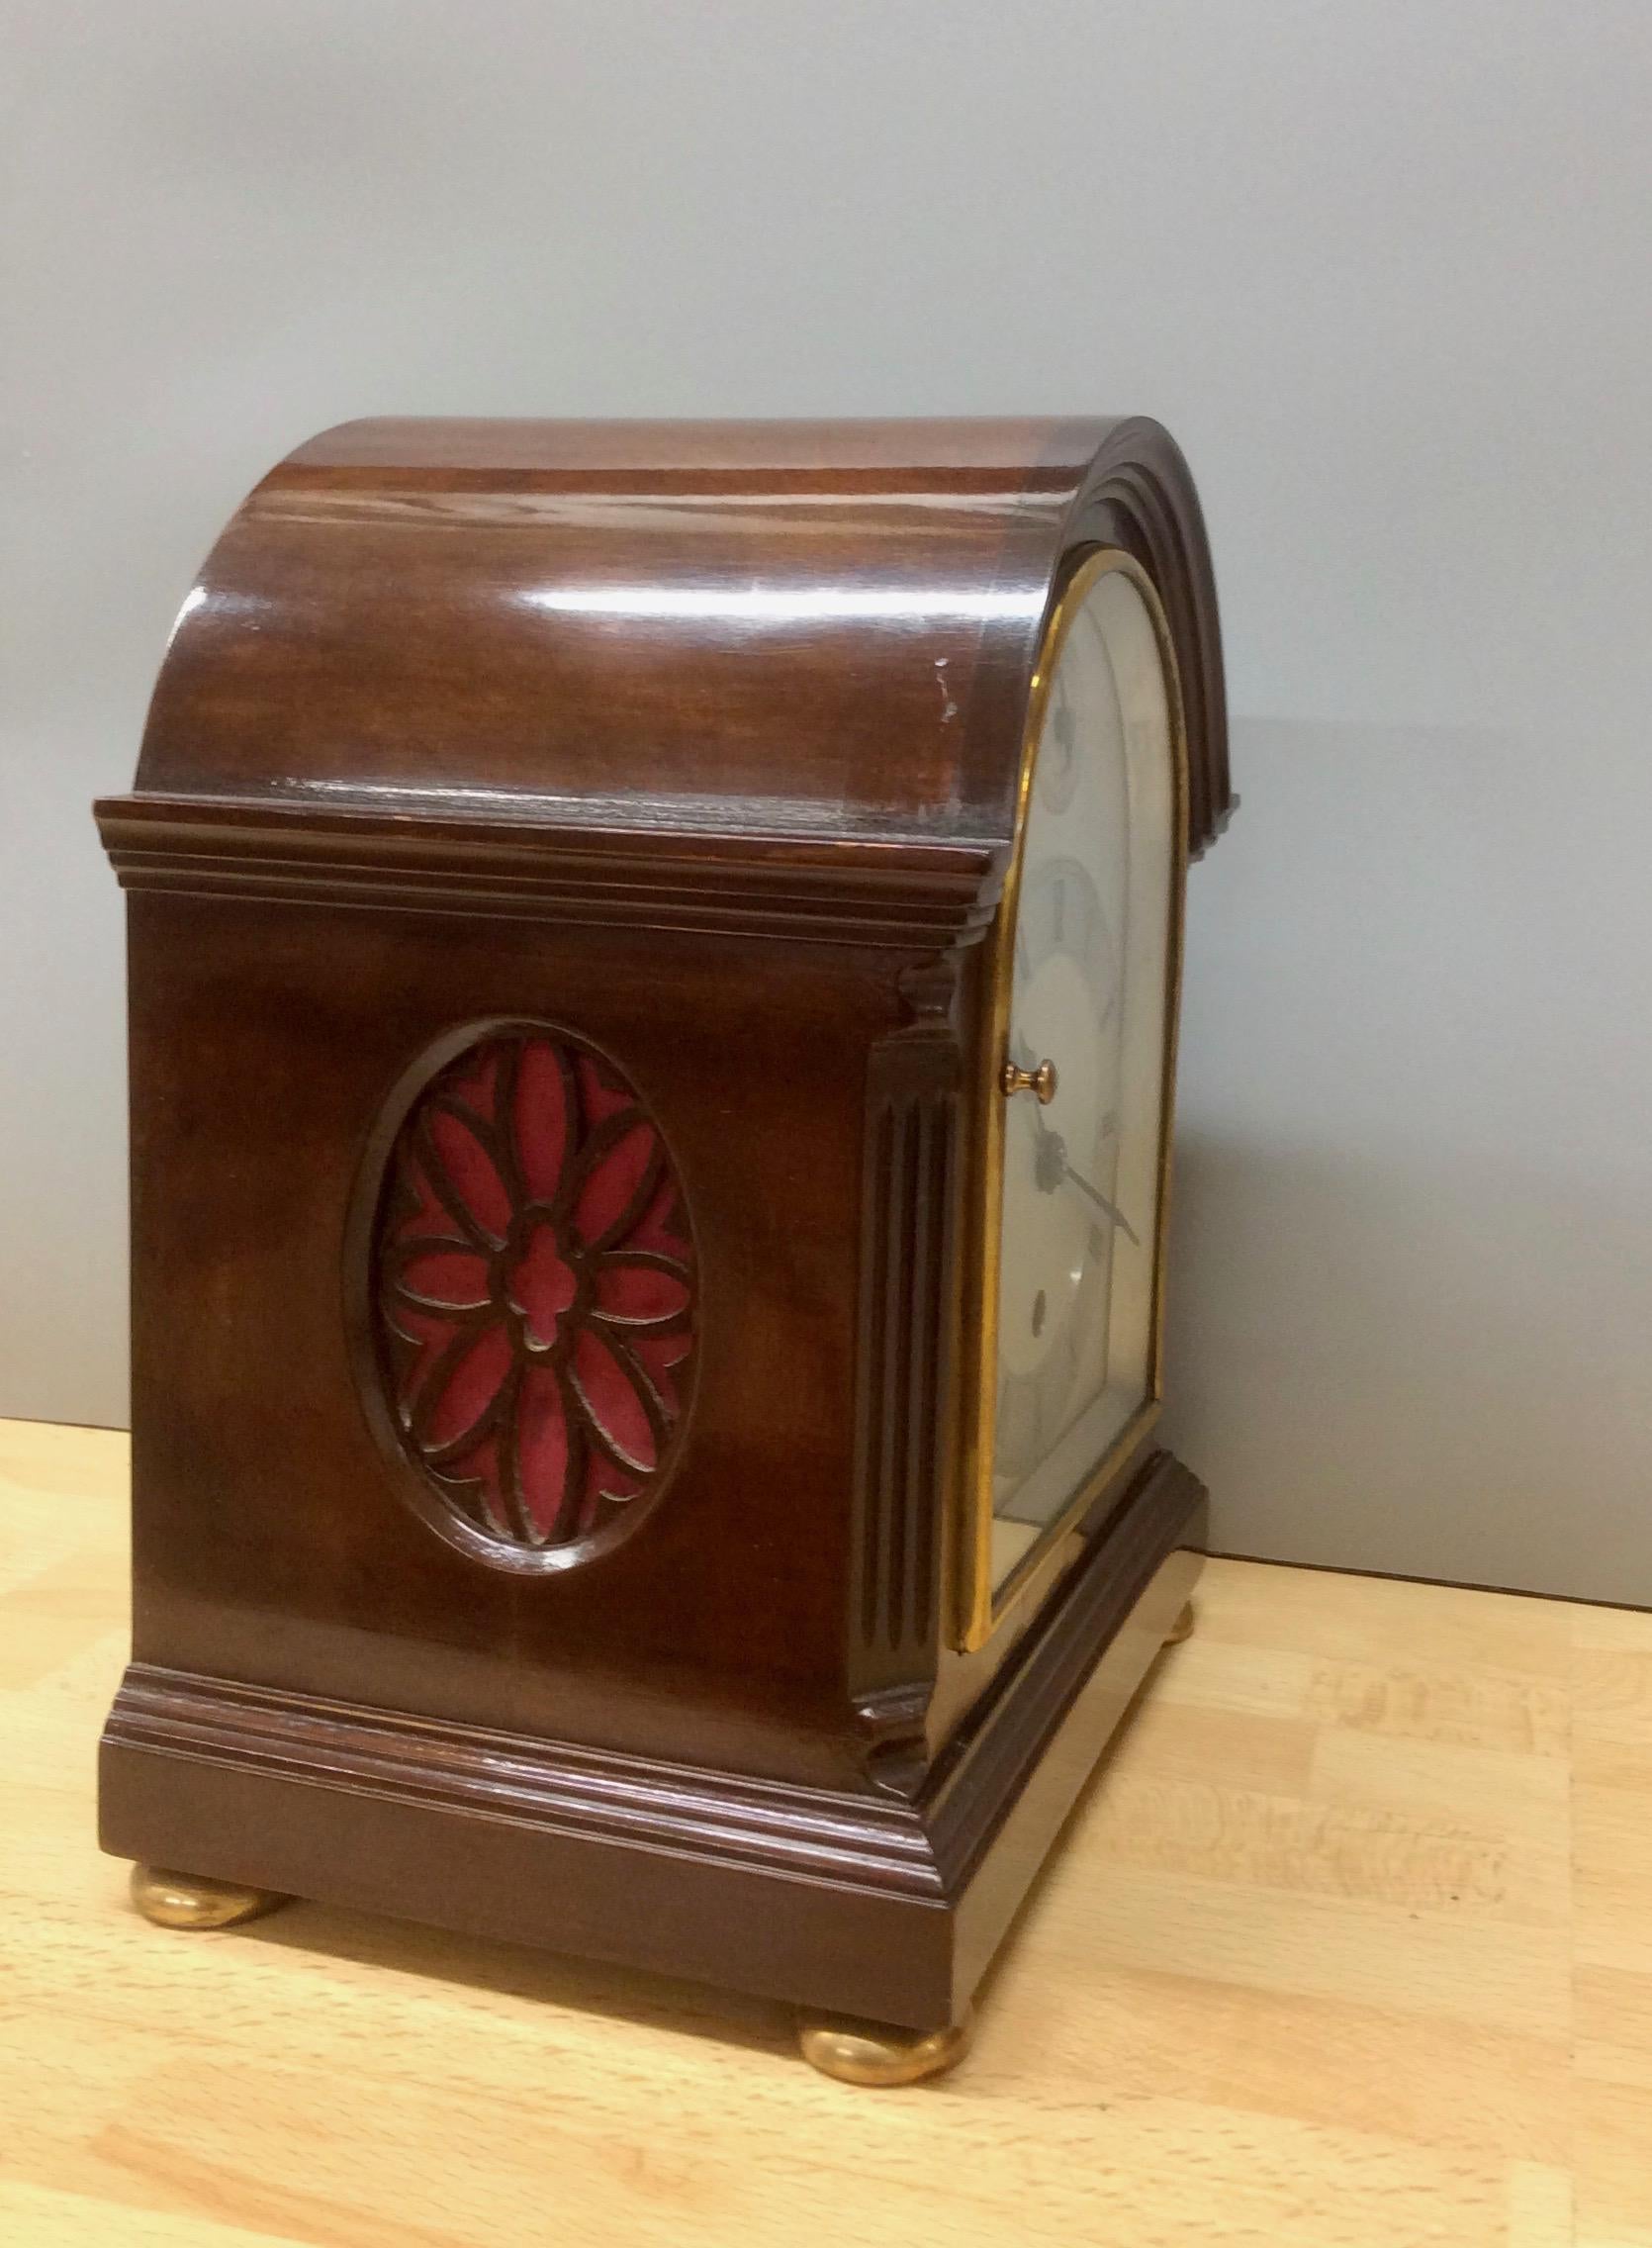 Edwardian miniature mantel clock standing on brass bun feet and a raised moulded plinth with canted reeded corners in a break arch case

Gilded, hinged bezel supporting a silvered dial, chapter ring with Roman numerals, subsidiary dial for slow /